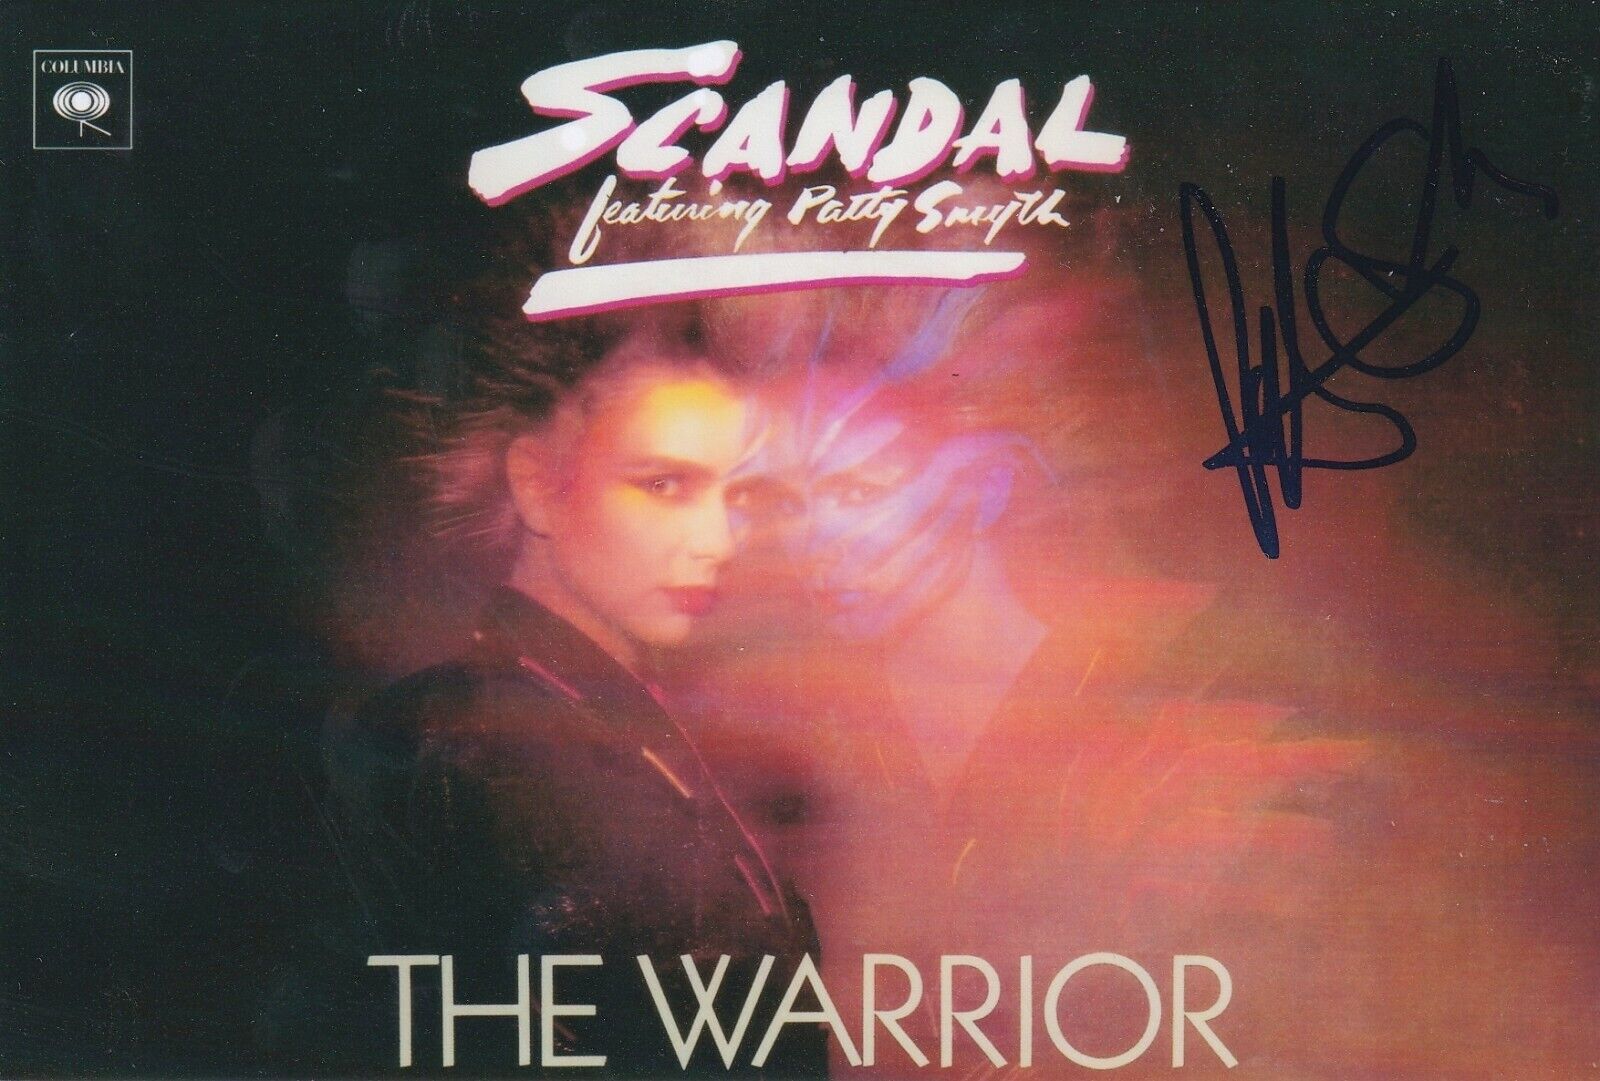 Patty Smyth of Scandal band REAL hand SIGNED 4x6 Photo Poster painting #4 COA Autographed